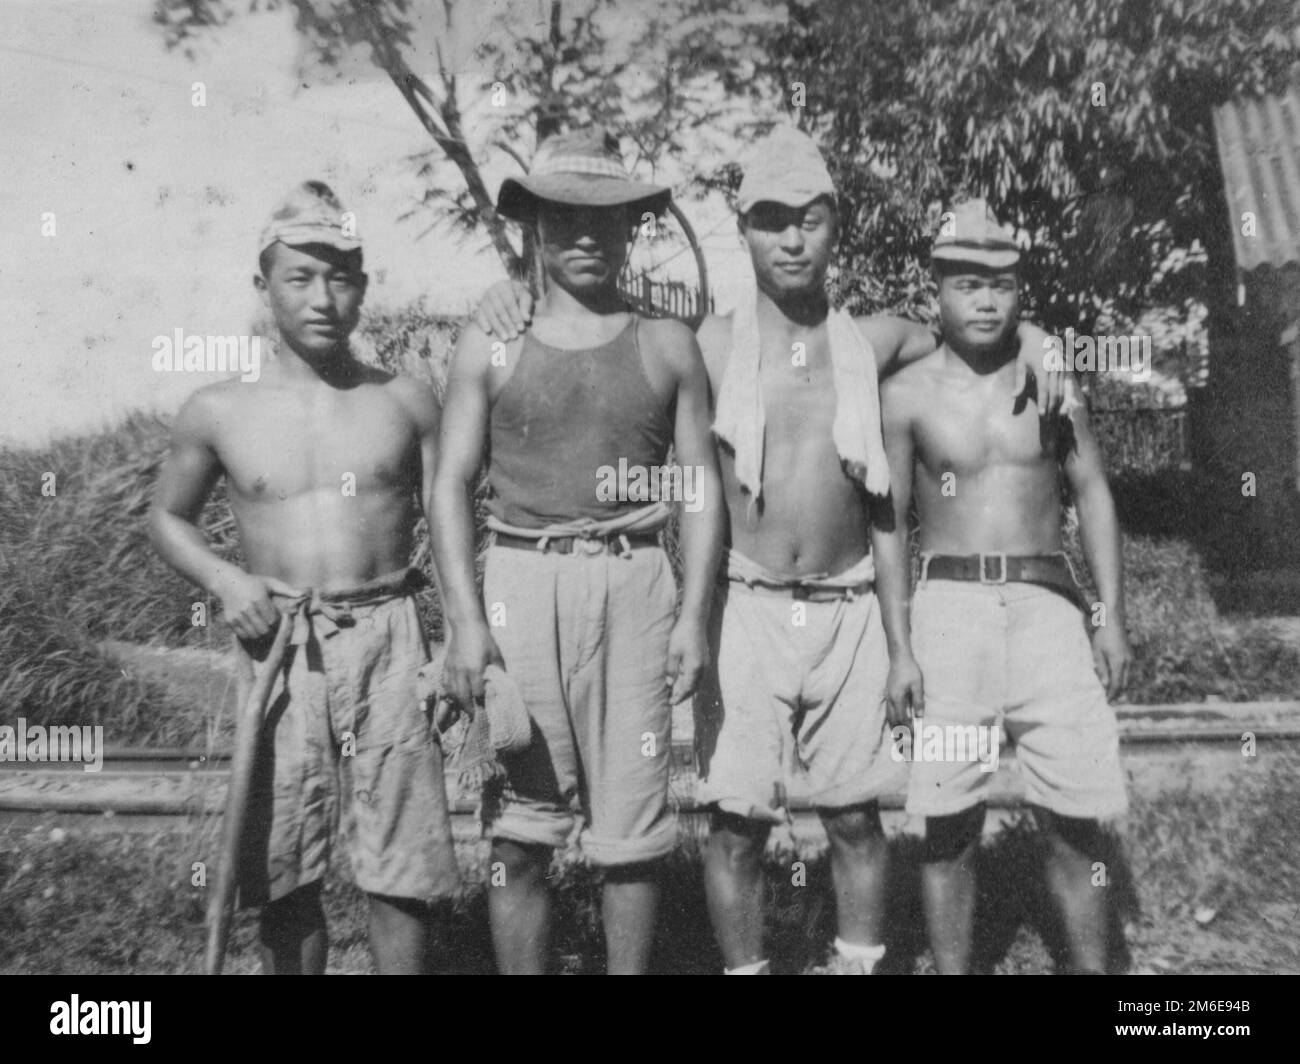 JAPANESE PRISONERS OF WAR. Former servicemen of the Imperial Japanese Military taken into custody by Allied authorities following Japan's capitulation and ordered to perform labor duties at Seletar Port, Singapore, are photographed in December 1946. These particular prisoners appear to be in relatively high spirits as their release from captivity and return home draws closer. Stock Photo